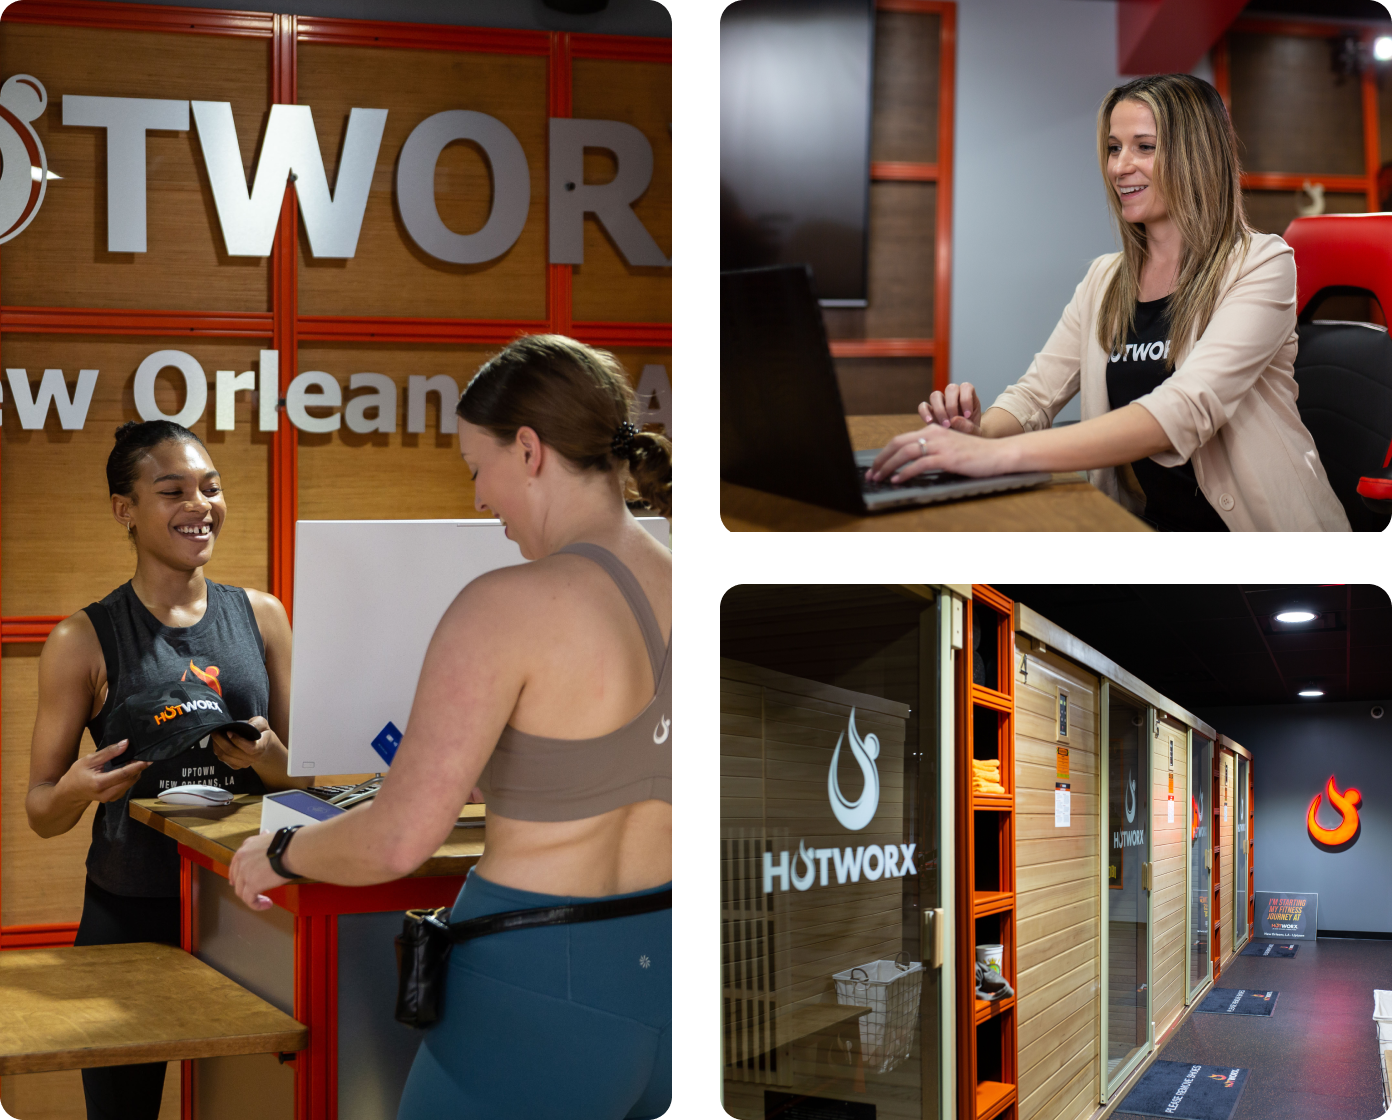 At a HOTWORX gym showing a Square Terminal payment, a business executive on a laptop, and a HOTWORX gym interior